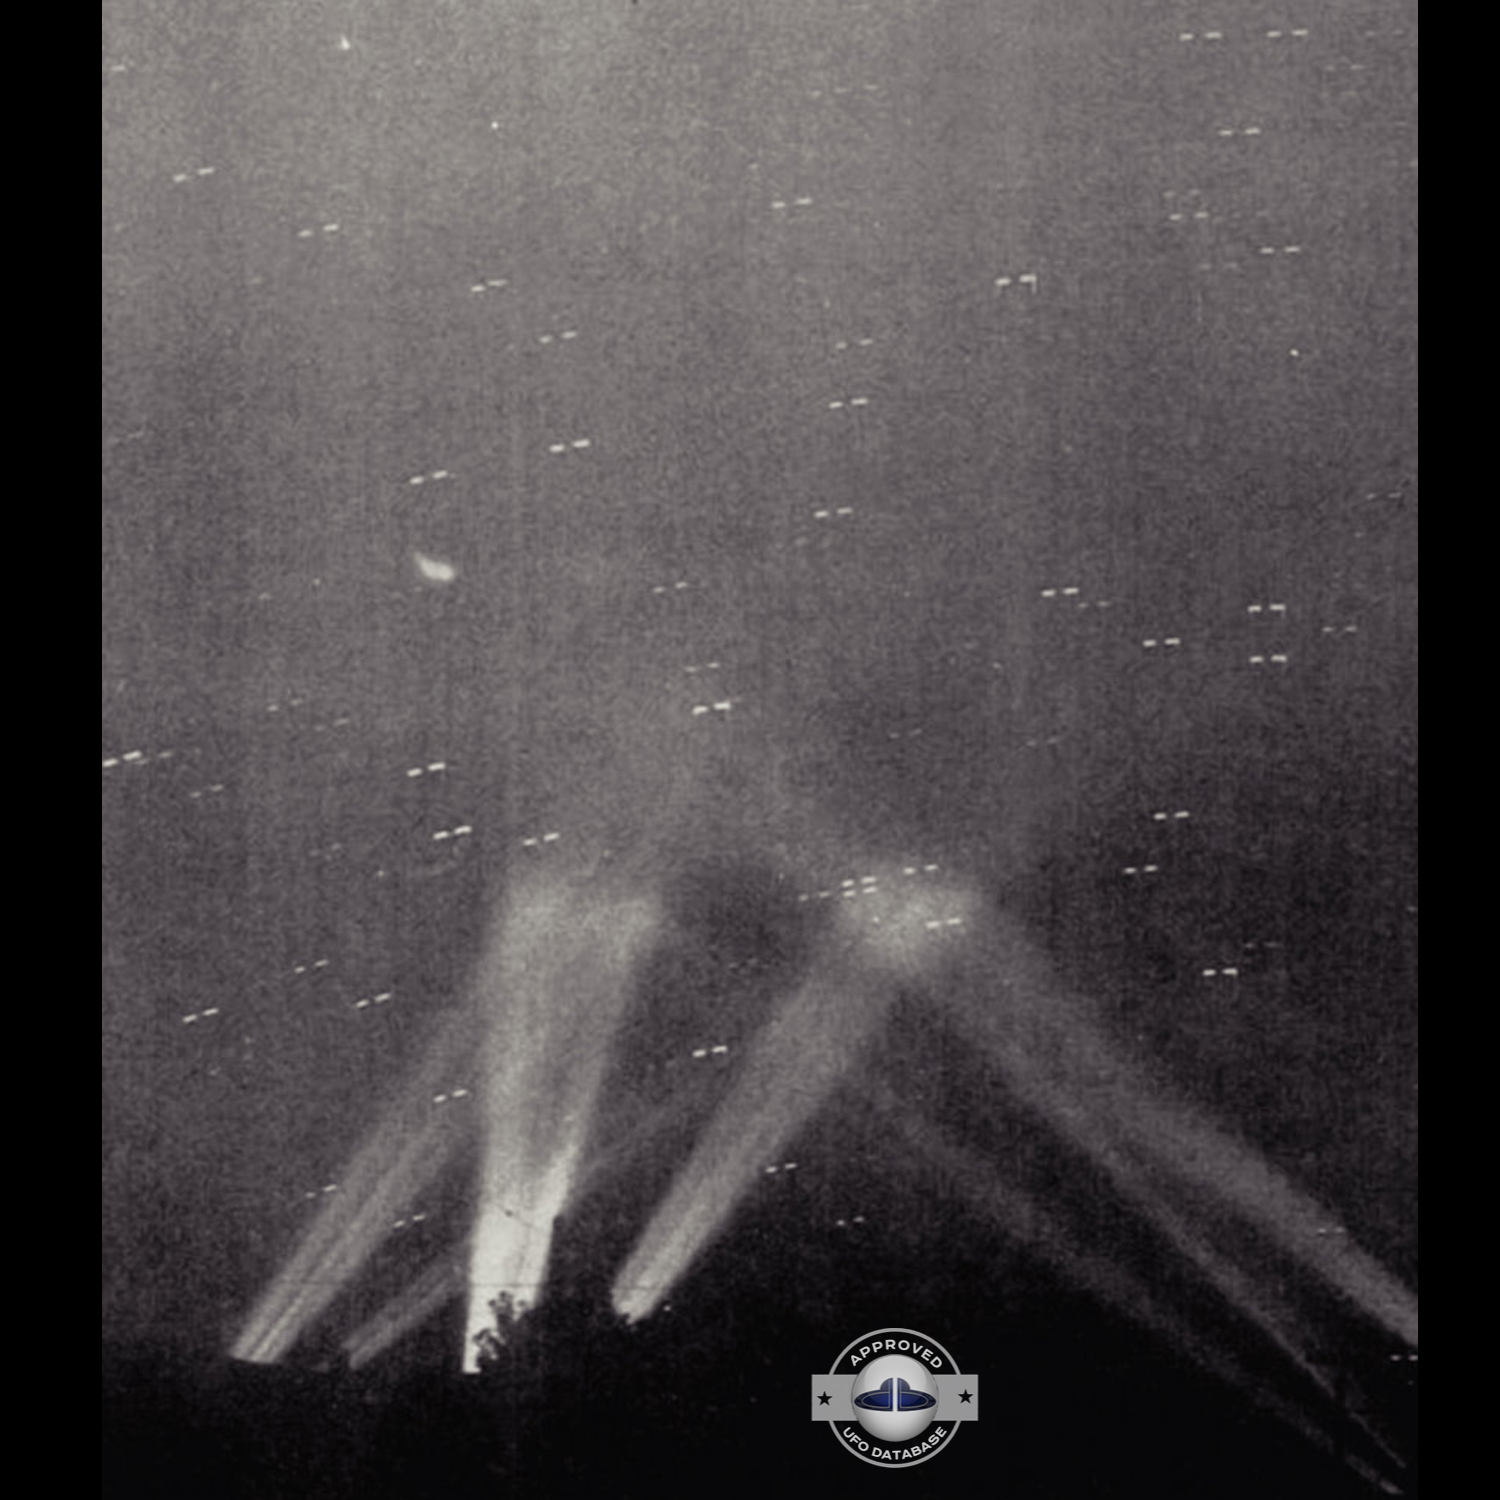 37th Coast Artillery Brigade lit up their spotlights to find a big UFO UFO Picture #109-3